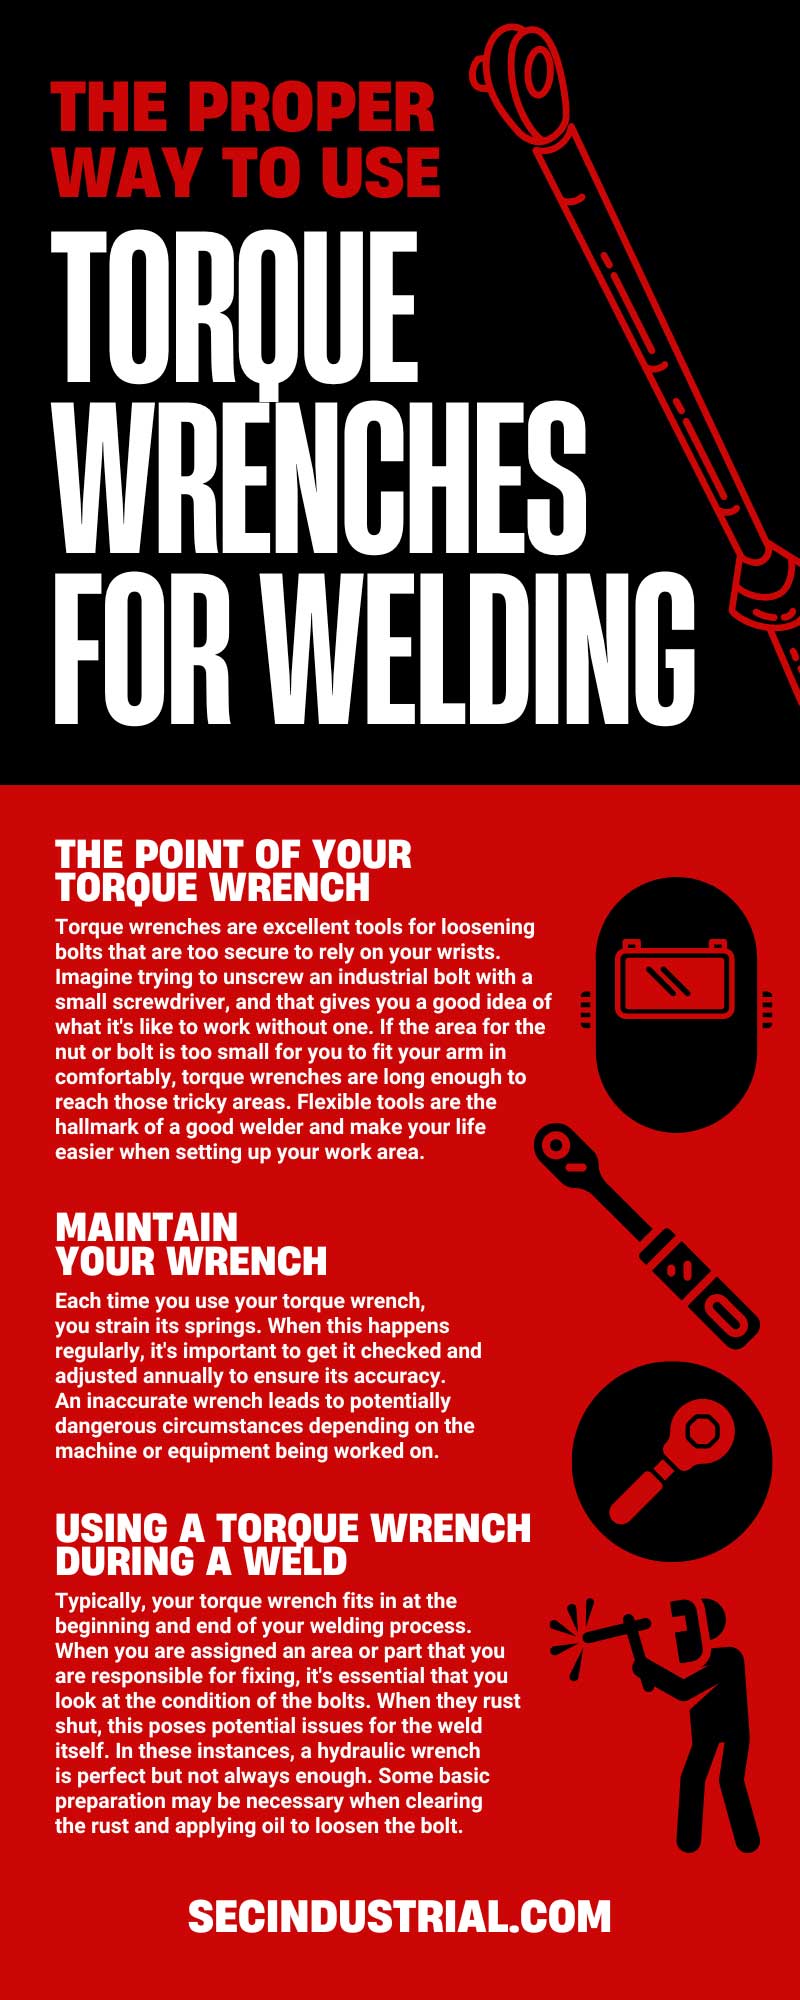 The Proper Way To Use Torque Wrenches for Welding